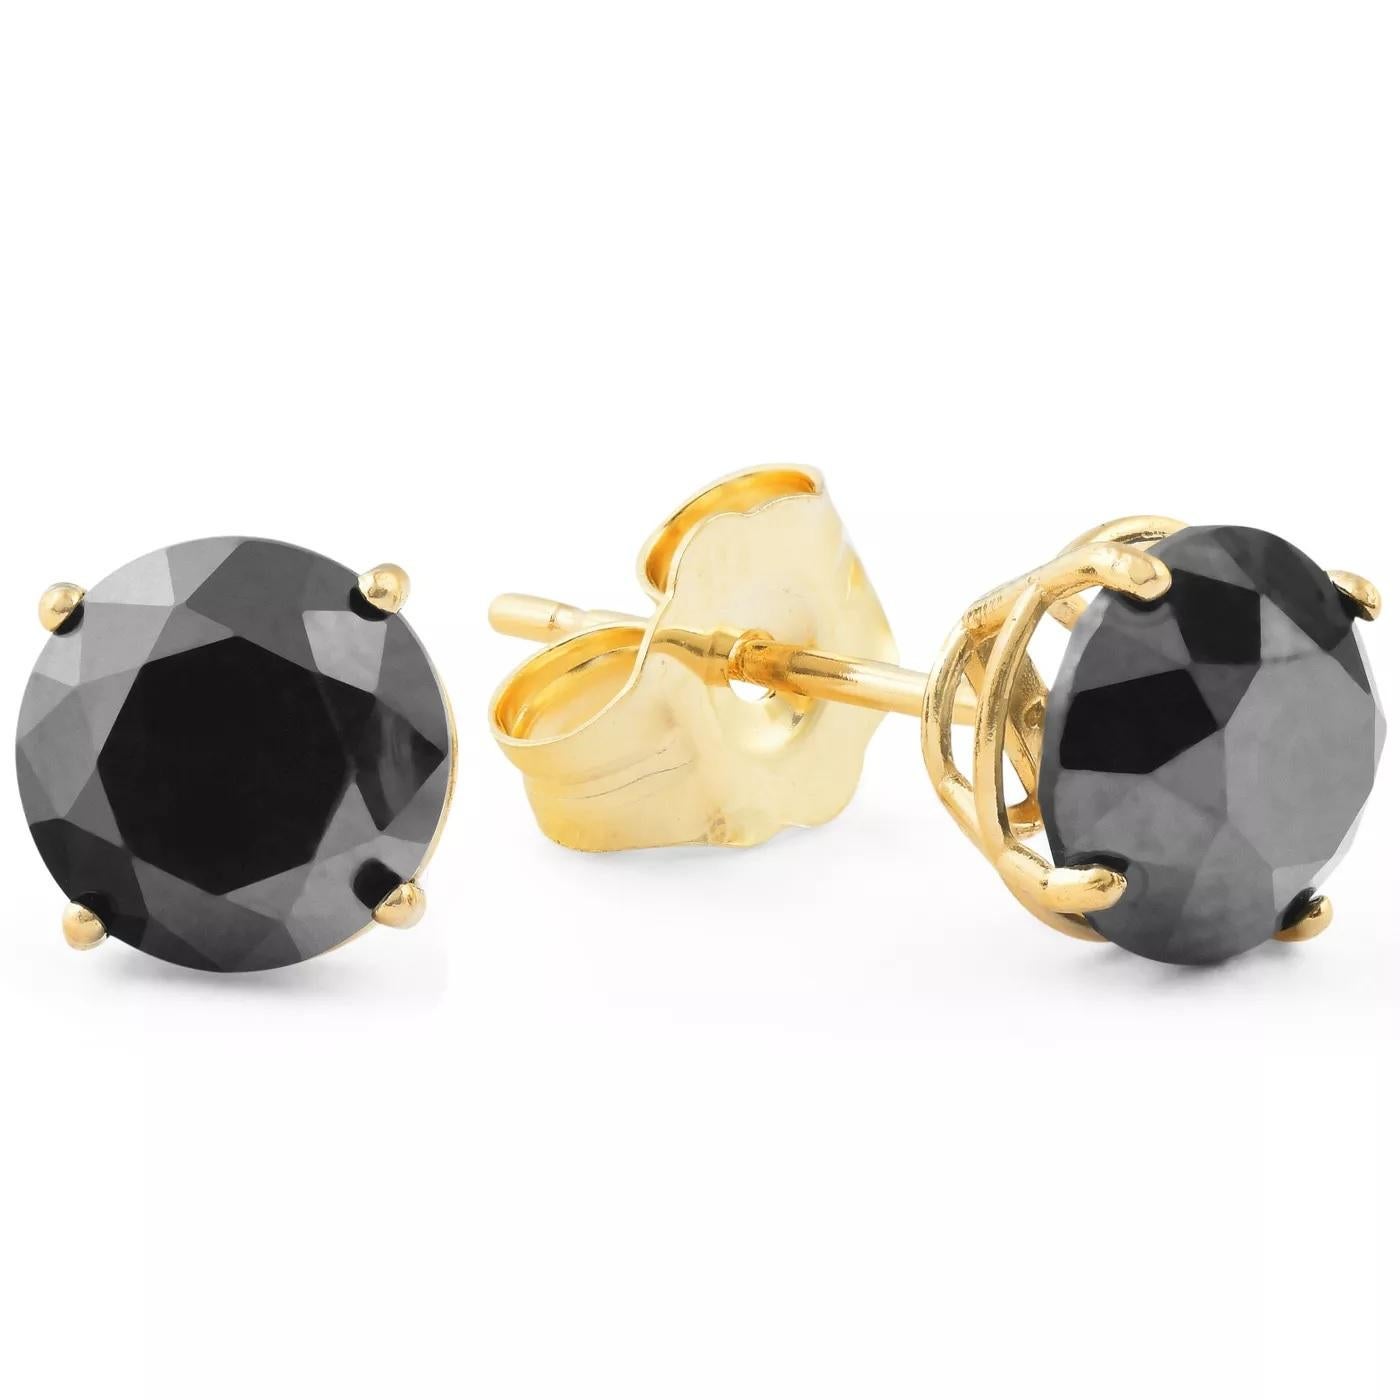 Alluring and refined, these diamond stud earrings are sure to be noticed. Created in 14 K yellow gold, the earring showcases a beguiling 1.44 carat natural black diamond solitaire measuring 6.75 x 6.79 x 4.60mm. Exquisitely made and Captivating with